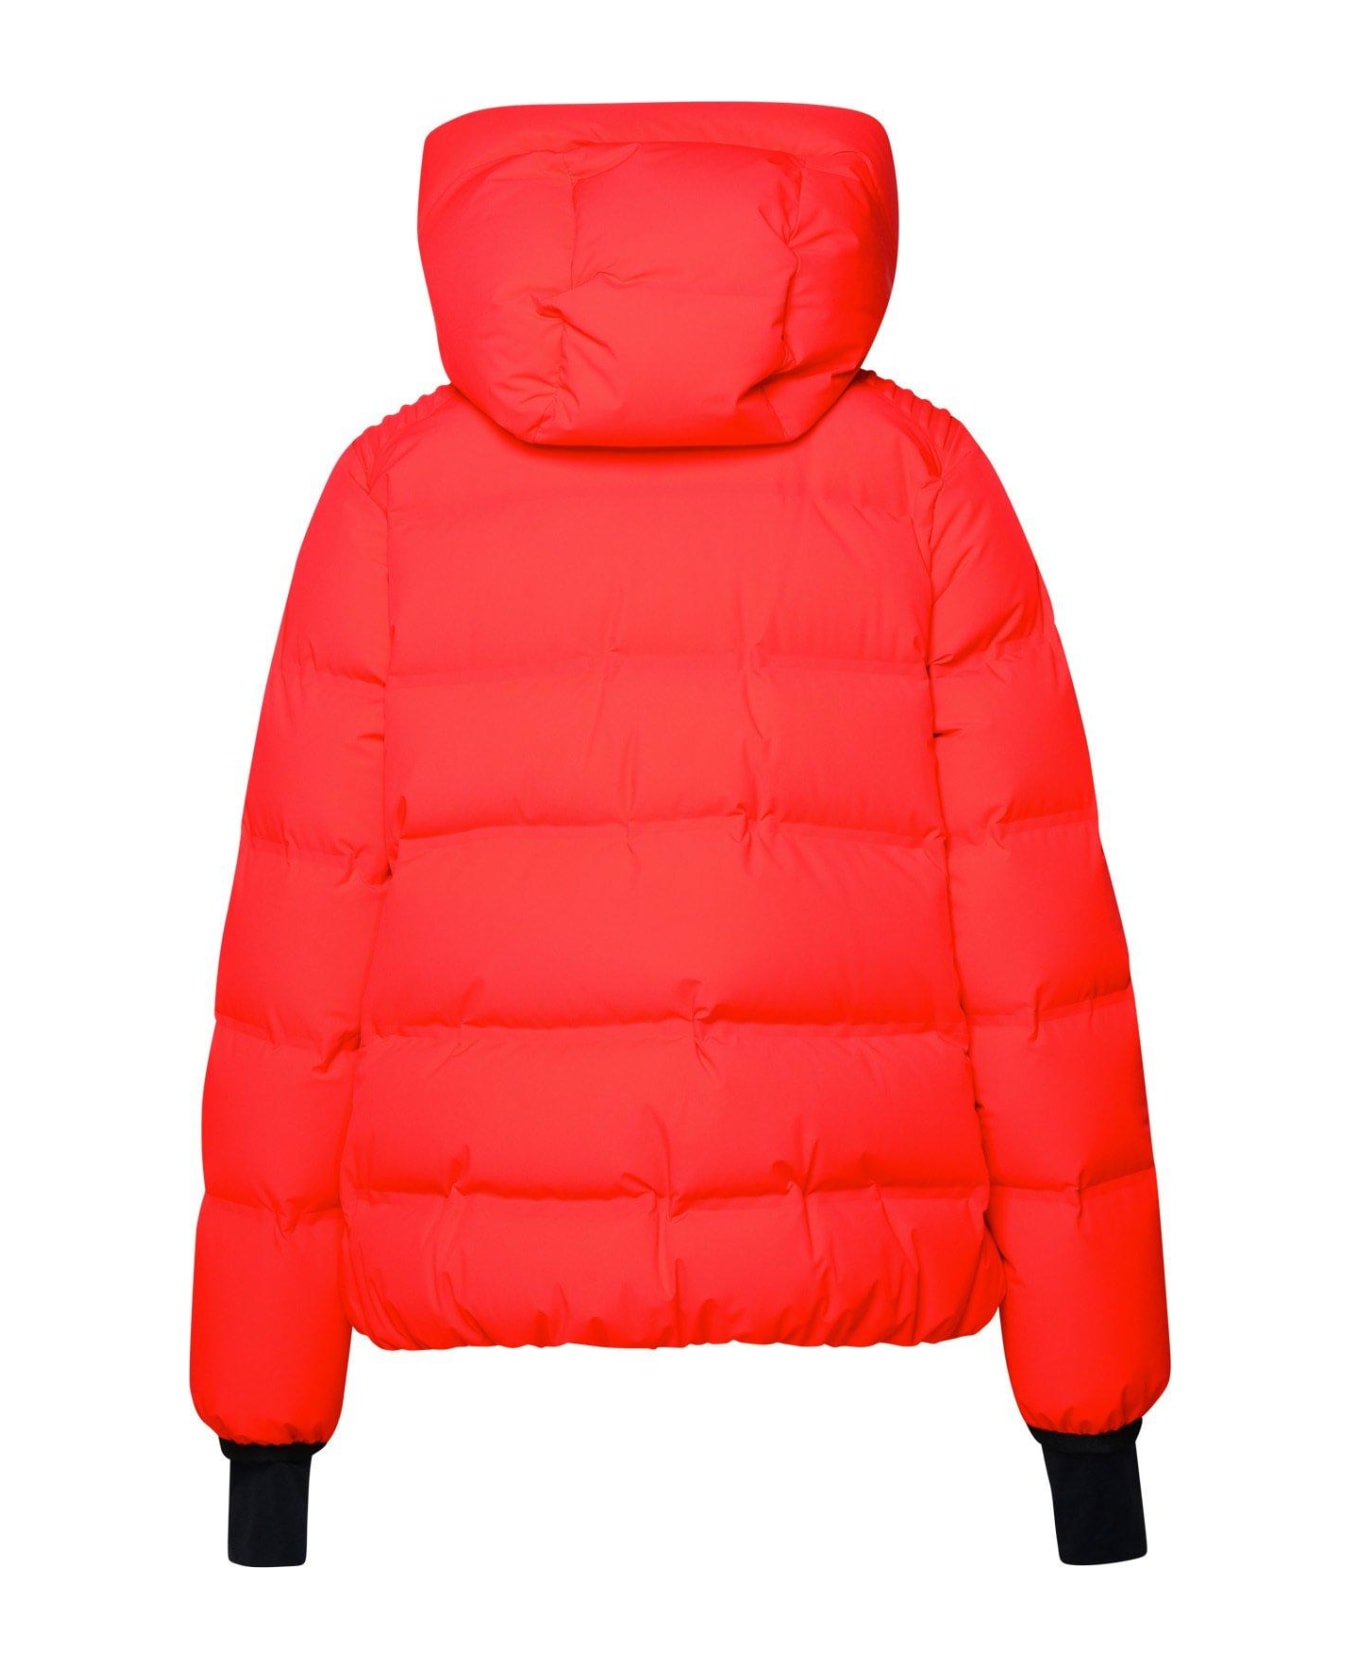 Moncler Grenoble Suisses Padded Down Jacket - RED